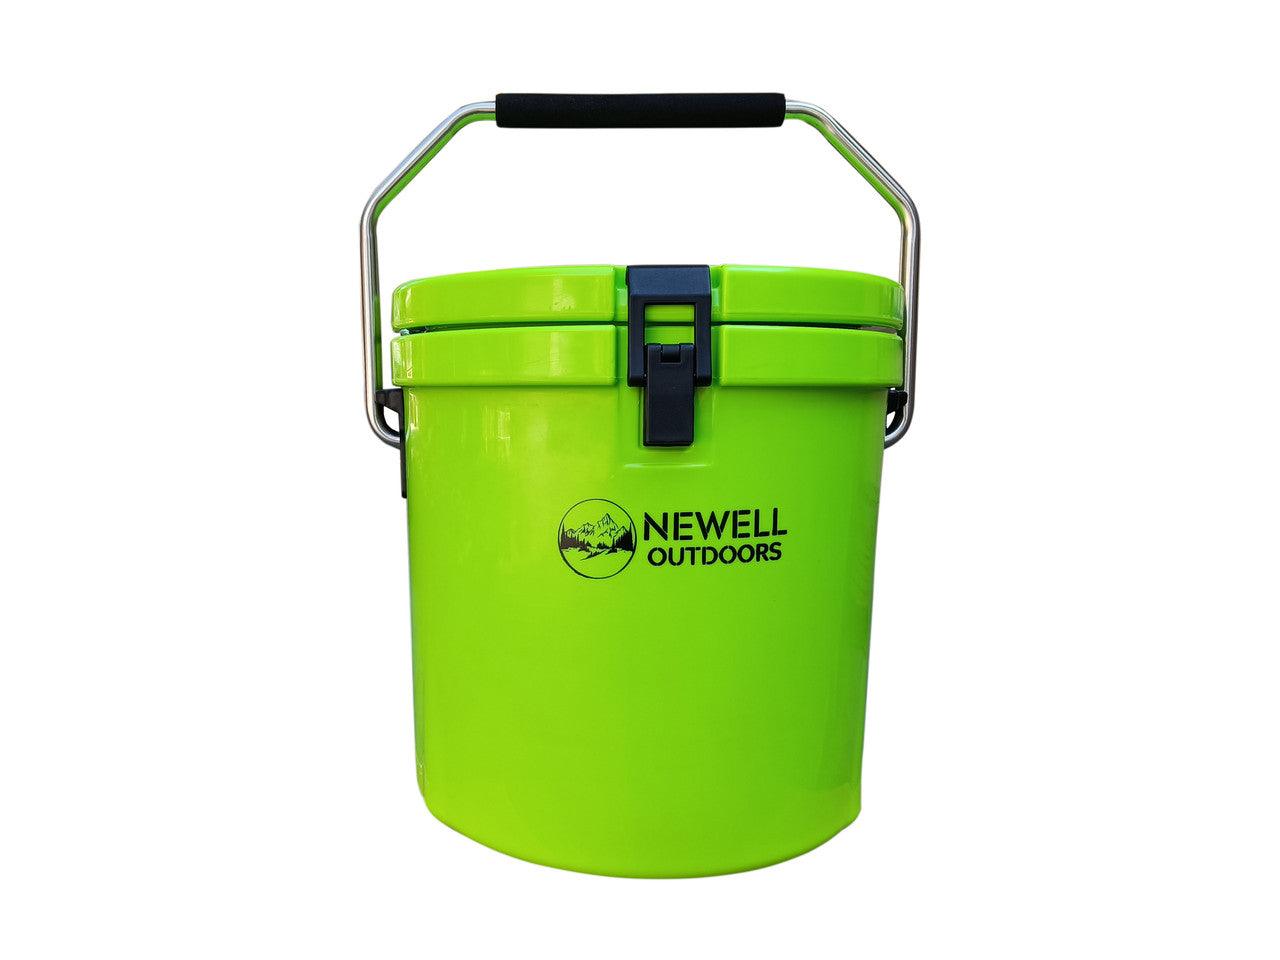 The Neweller Twelve in Green with a Handle - Newell Outdoors